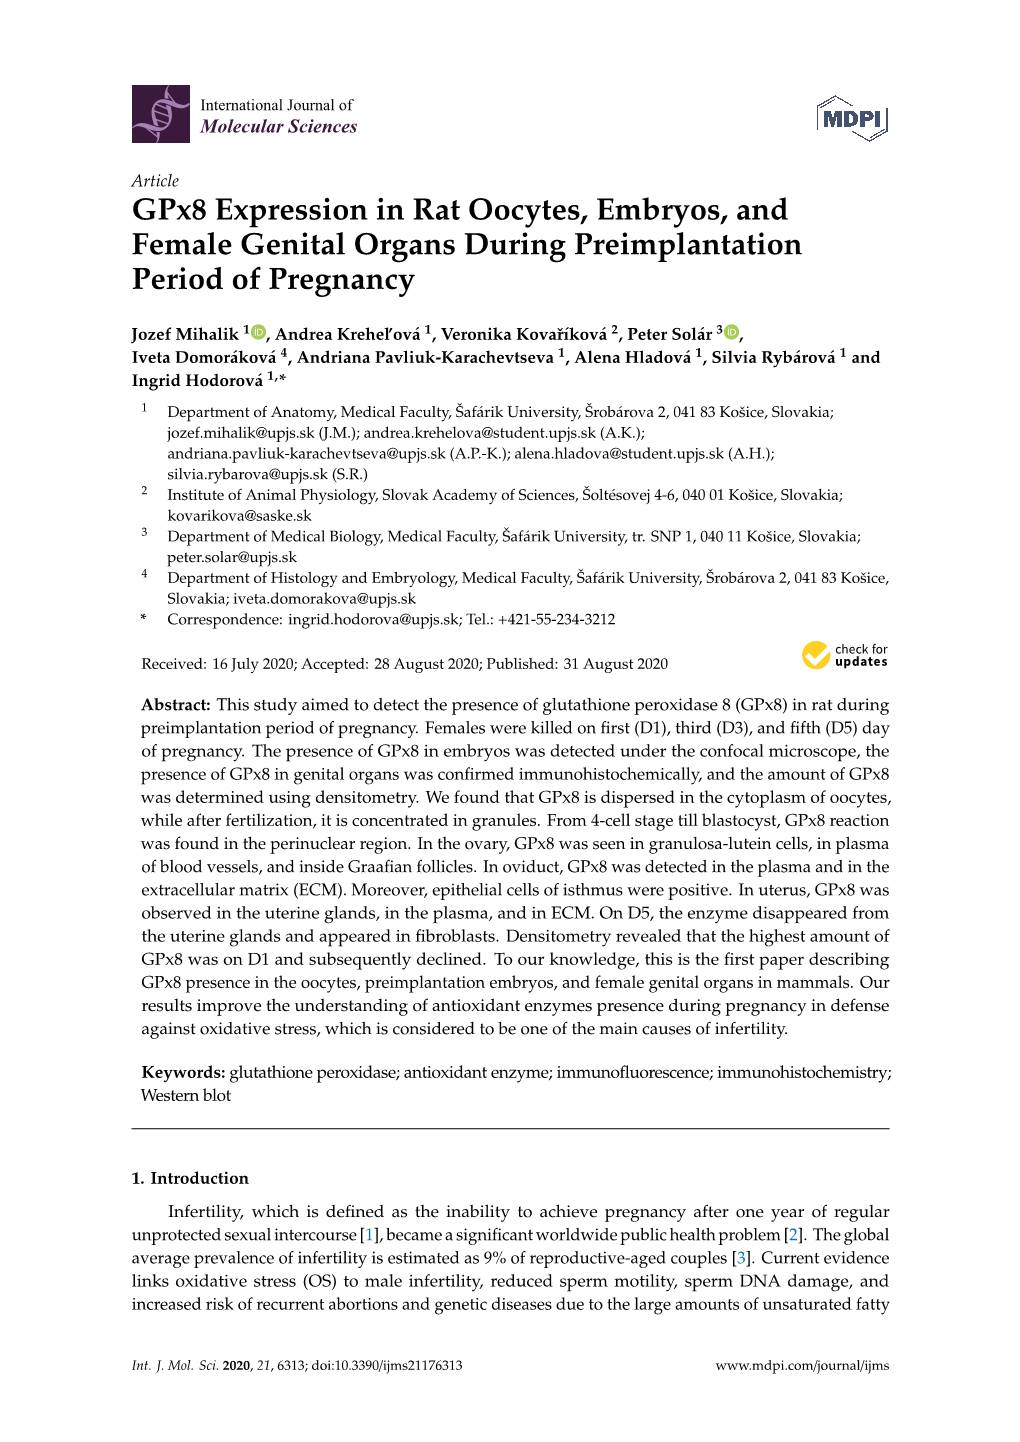 Gpx8 Expression in Rat Oocytes, Embryos, and Female Genital Organs During Preimplantation Period of Pregnancy